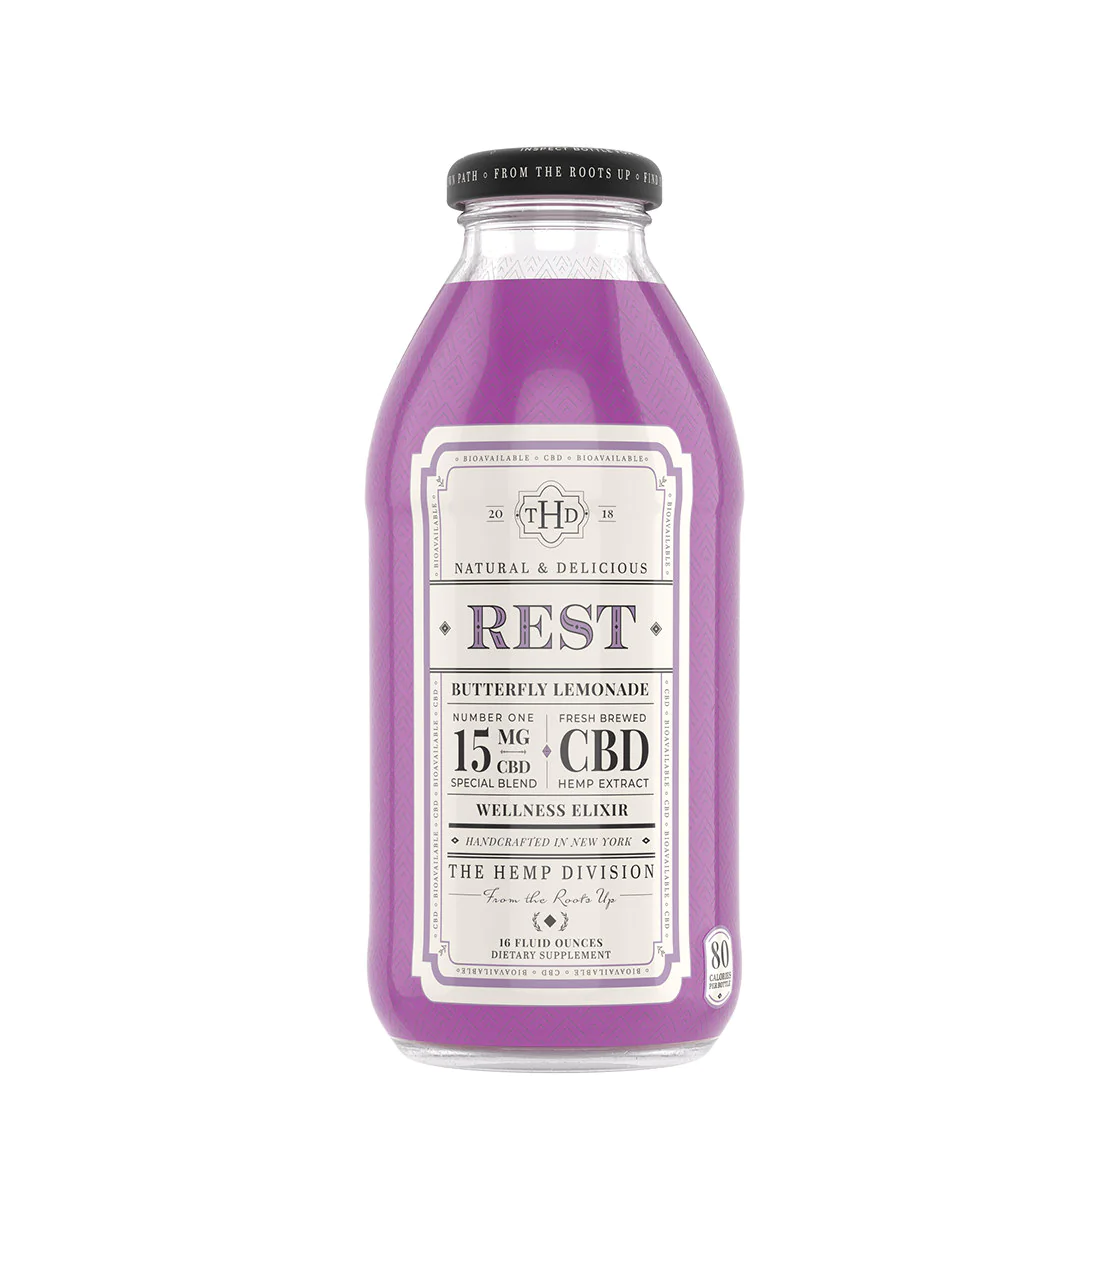 COLD DRINKS By The Hemp Division-Chill Bliss Unveiled In-Depth Review of Top Cold Drink Selections